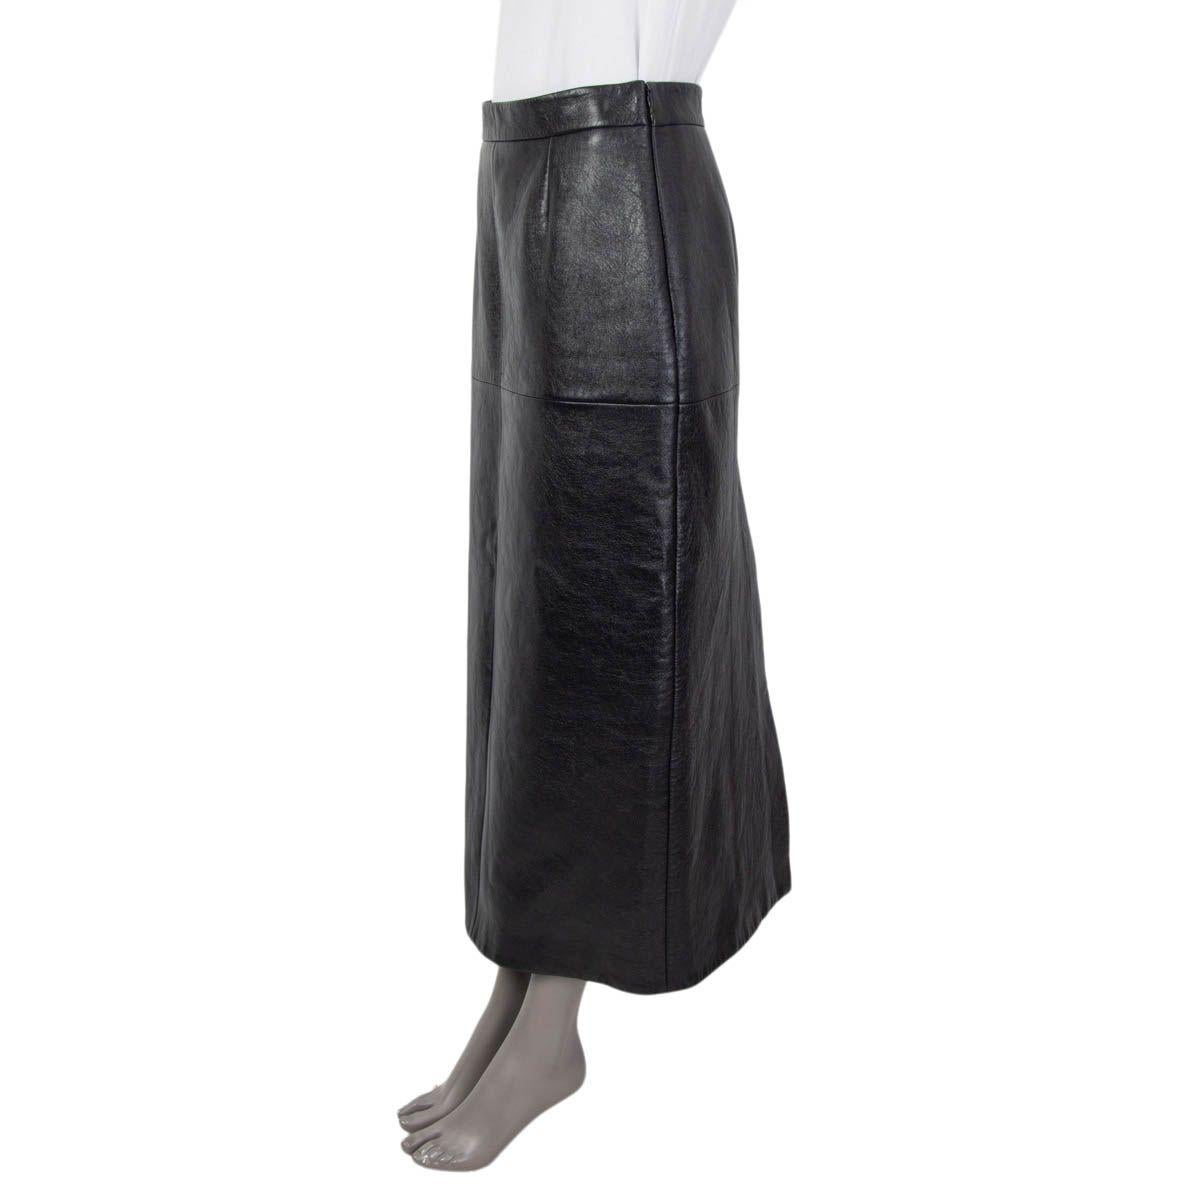 100% authentic Miu Miu paneled high-rise midi skirt in black lambskin (100%). Features a slit at the back. Opens with a concealed zipper and a hook at the side. Lined in black viscose (64%) and polyester (36%). Has been worn and is in excellent